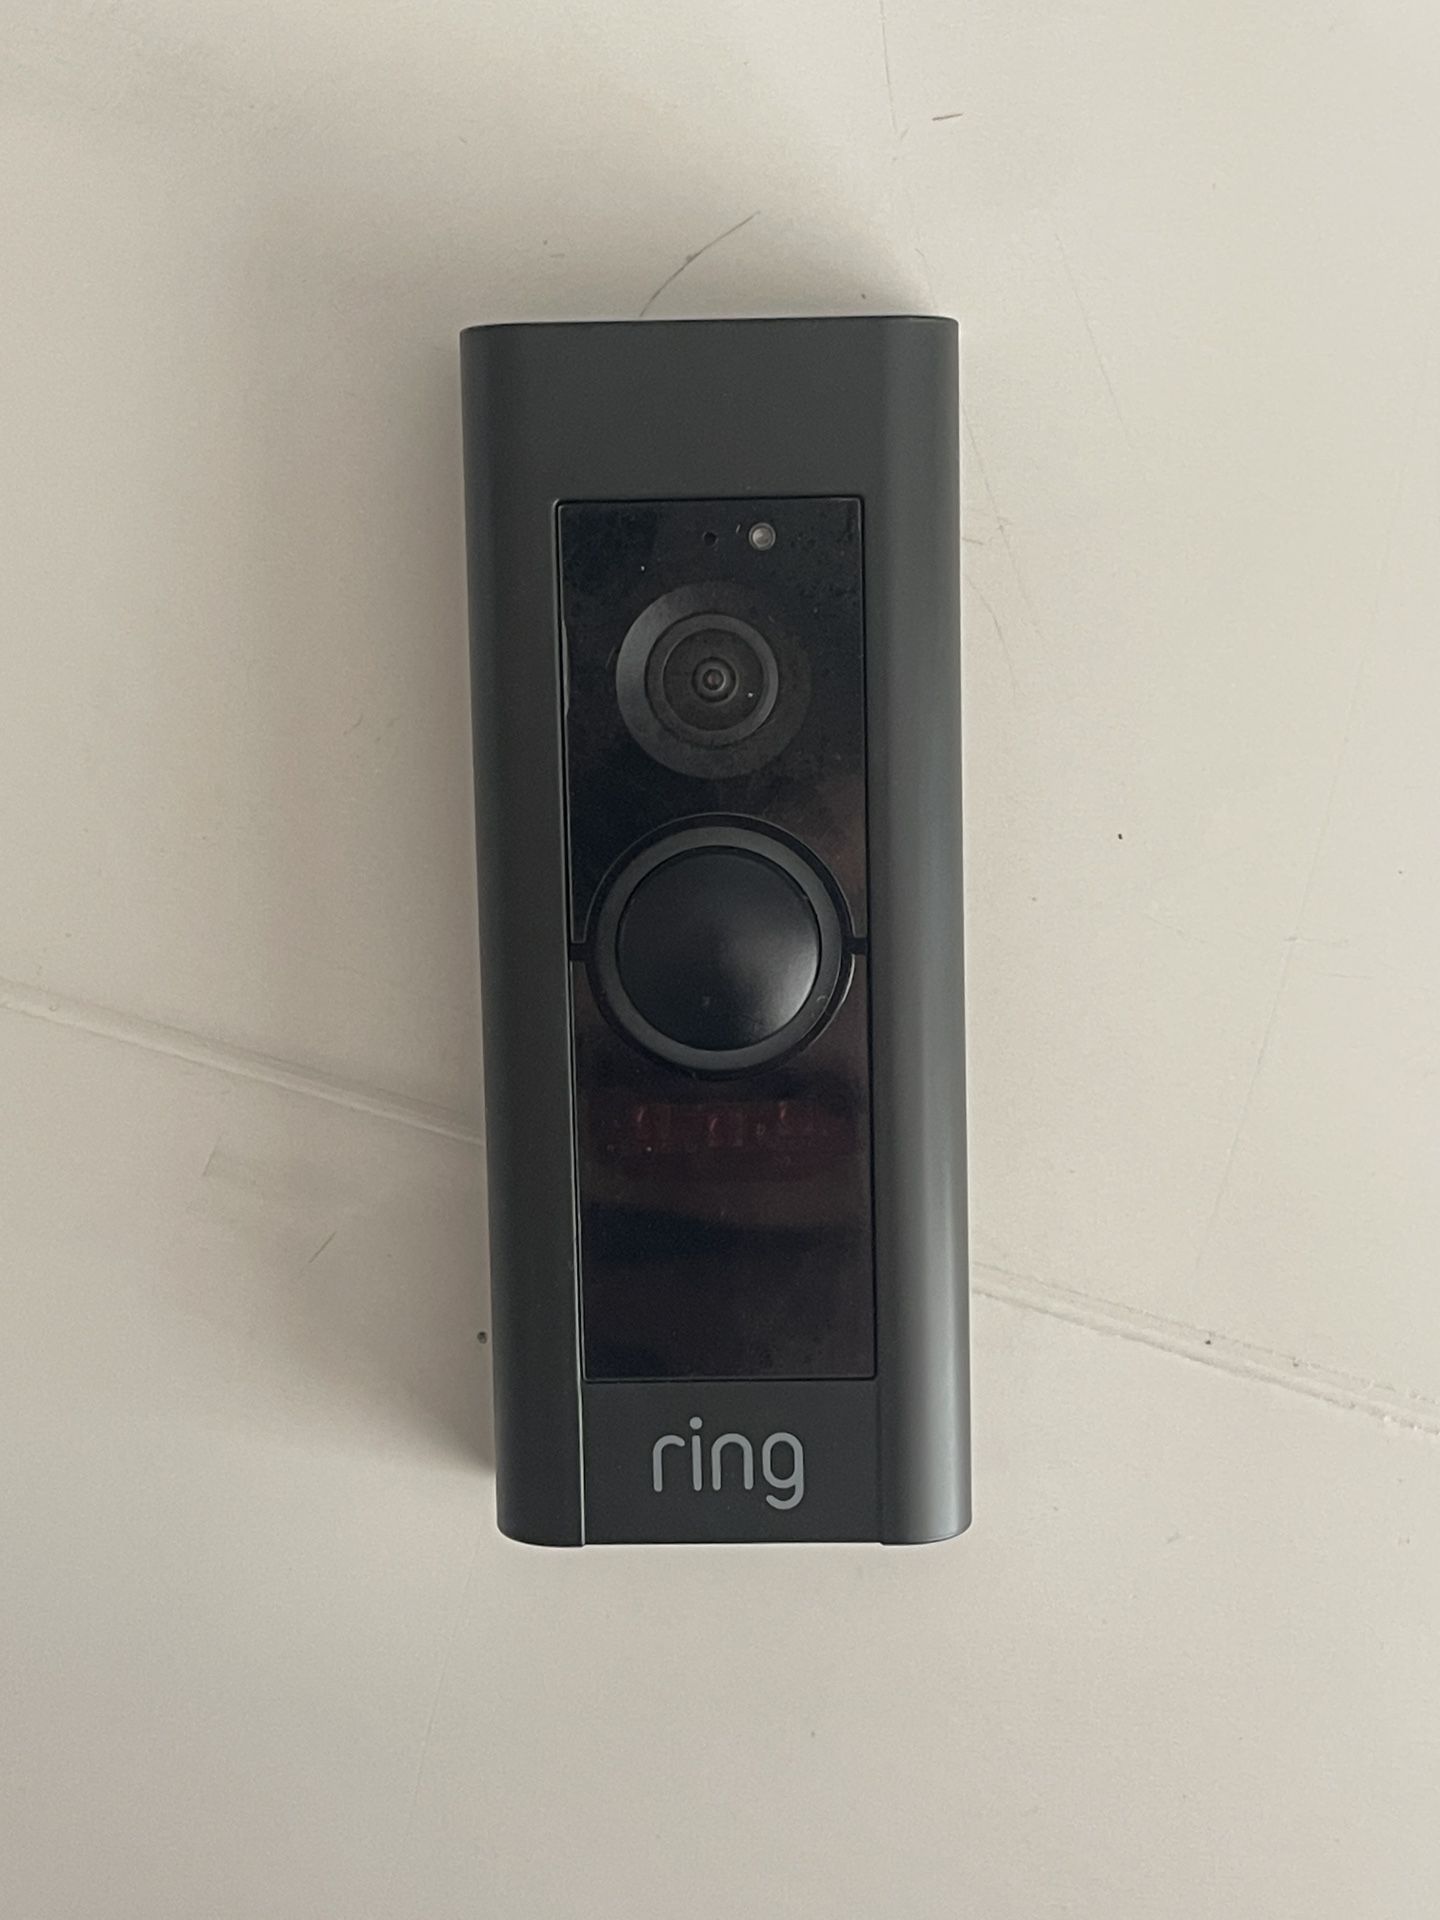 Ring Video Doorbell Pro - Smart Wired WiFi Doorbell Camera with Color Video